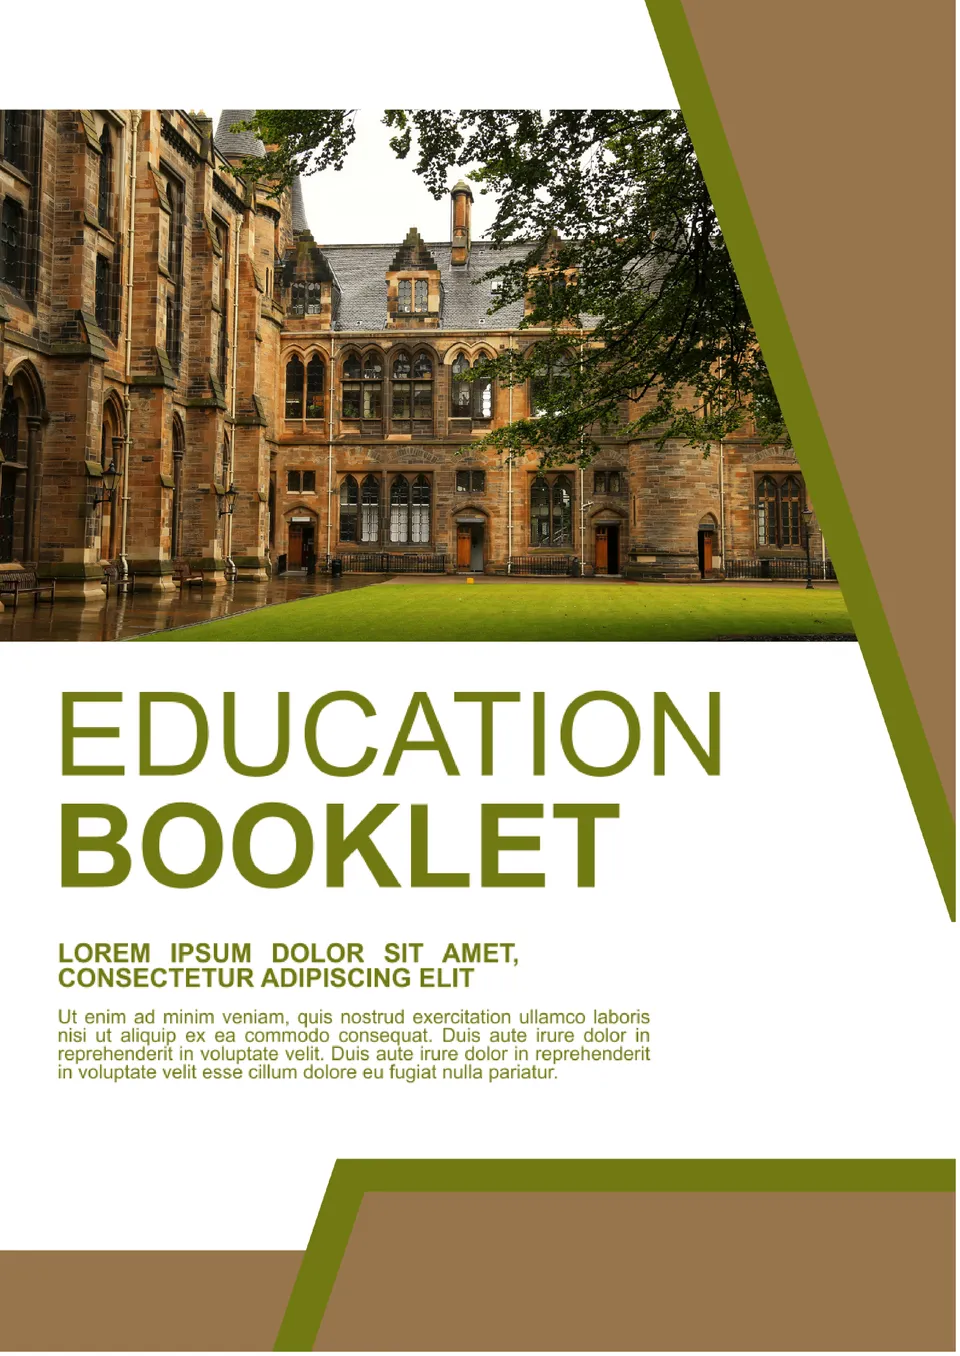 Education Booklet Template